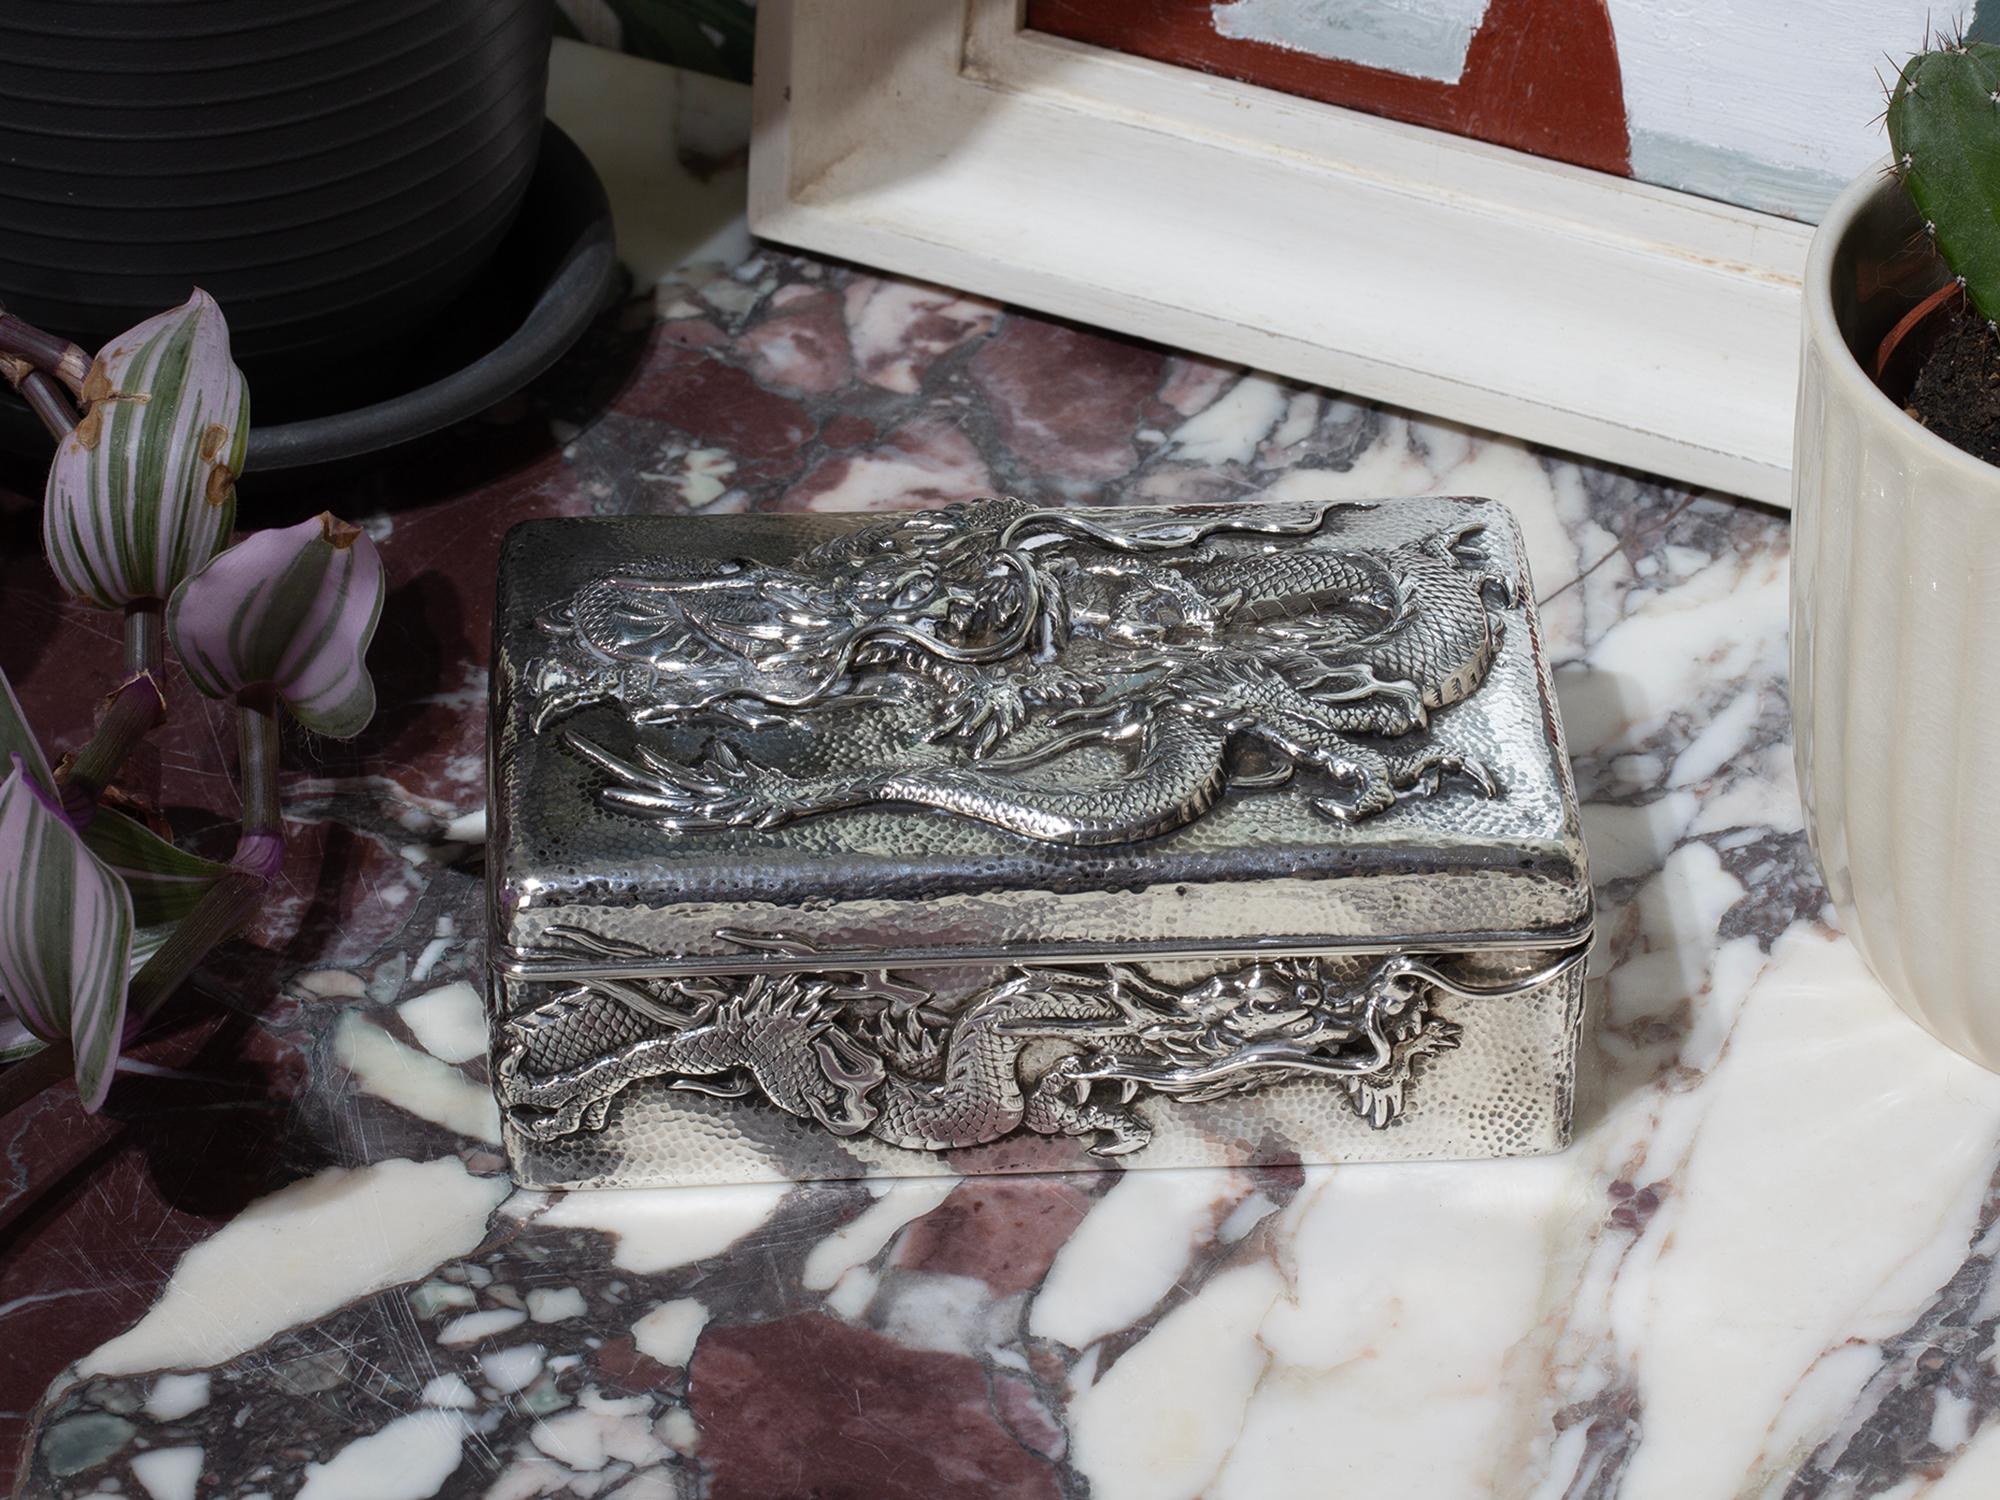 Hammered Silver Decoration Stamped Jungin Pure Silver 純銀

From our Japanese collection, we are pleased to offer a Japanese Meiji Period Silver Dragon Box. The box of rectangular form cast from solid silver with a hammered exterior across the whole